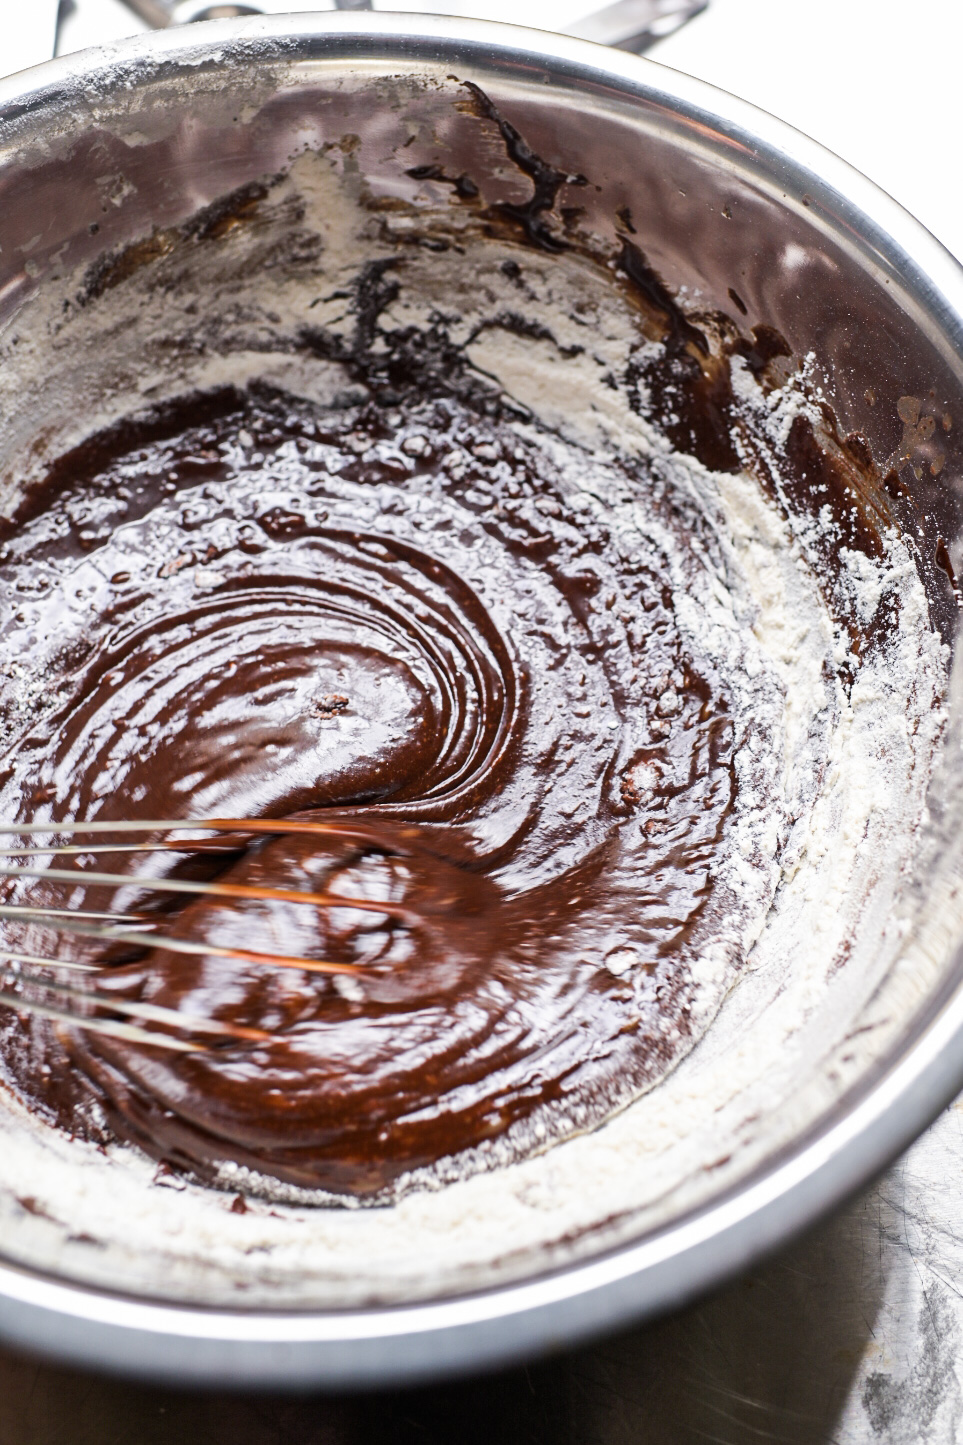 Dry ingredients are whisked in to the melted chocolate and olive oil